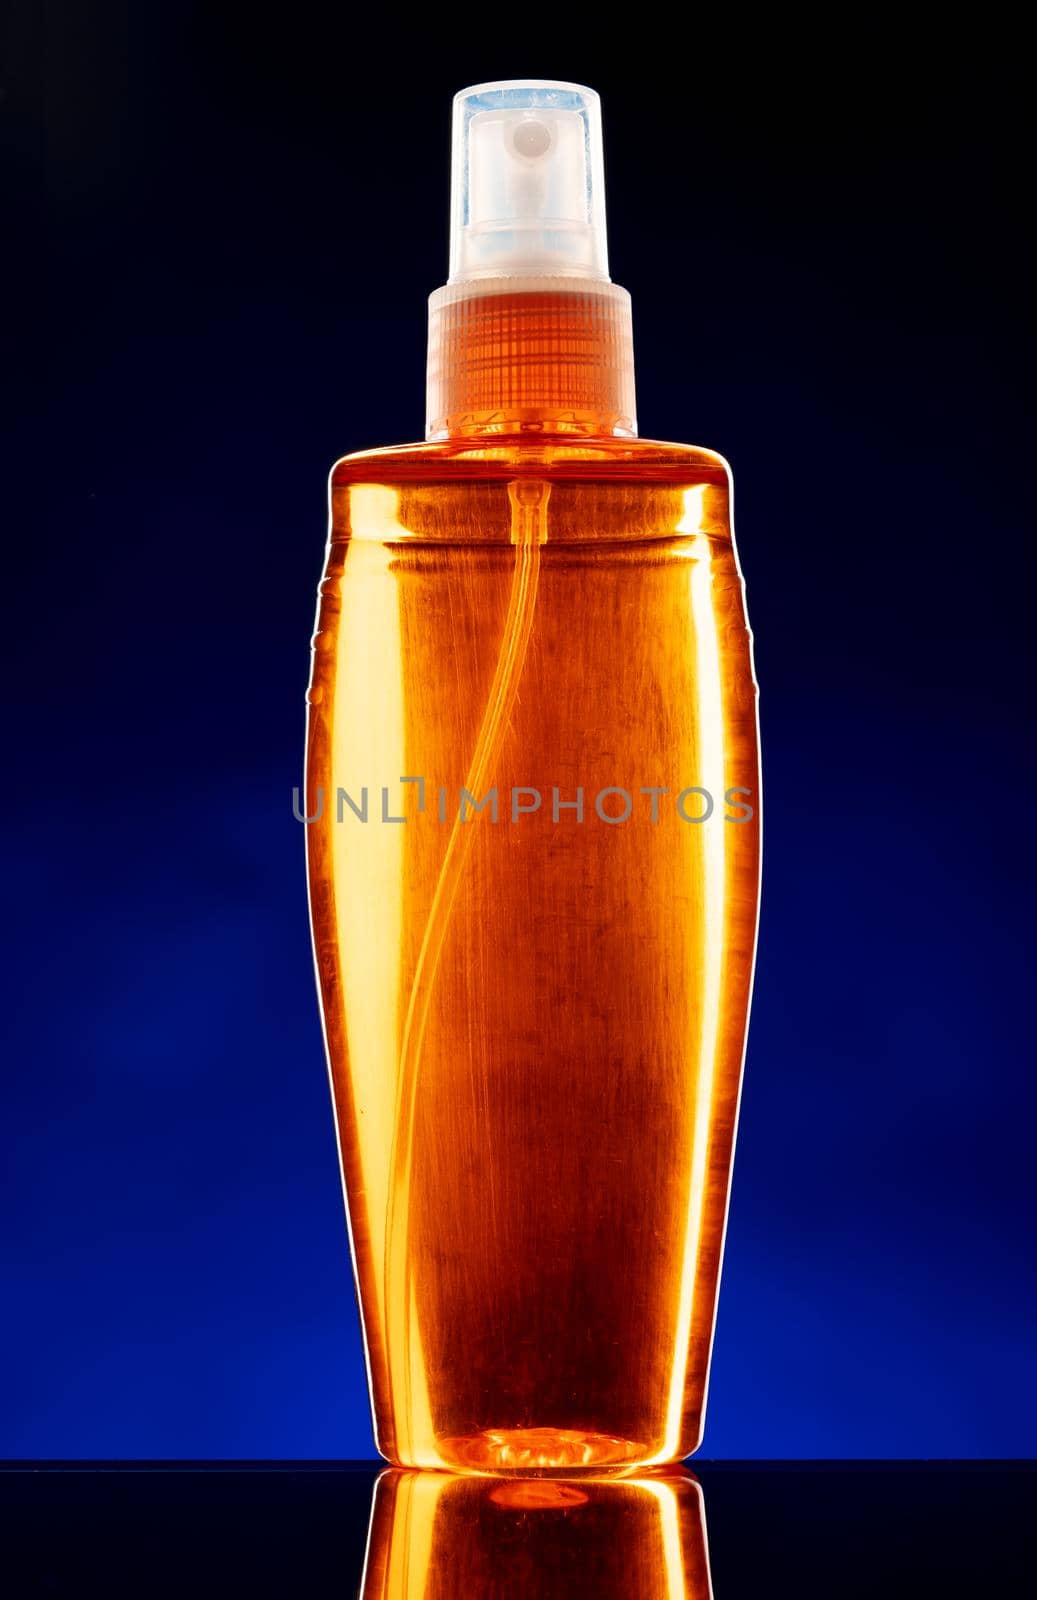 Glass bottle with cosmetic oil on dark background by Fabrikasimf